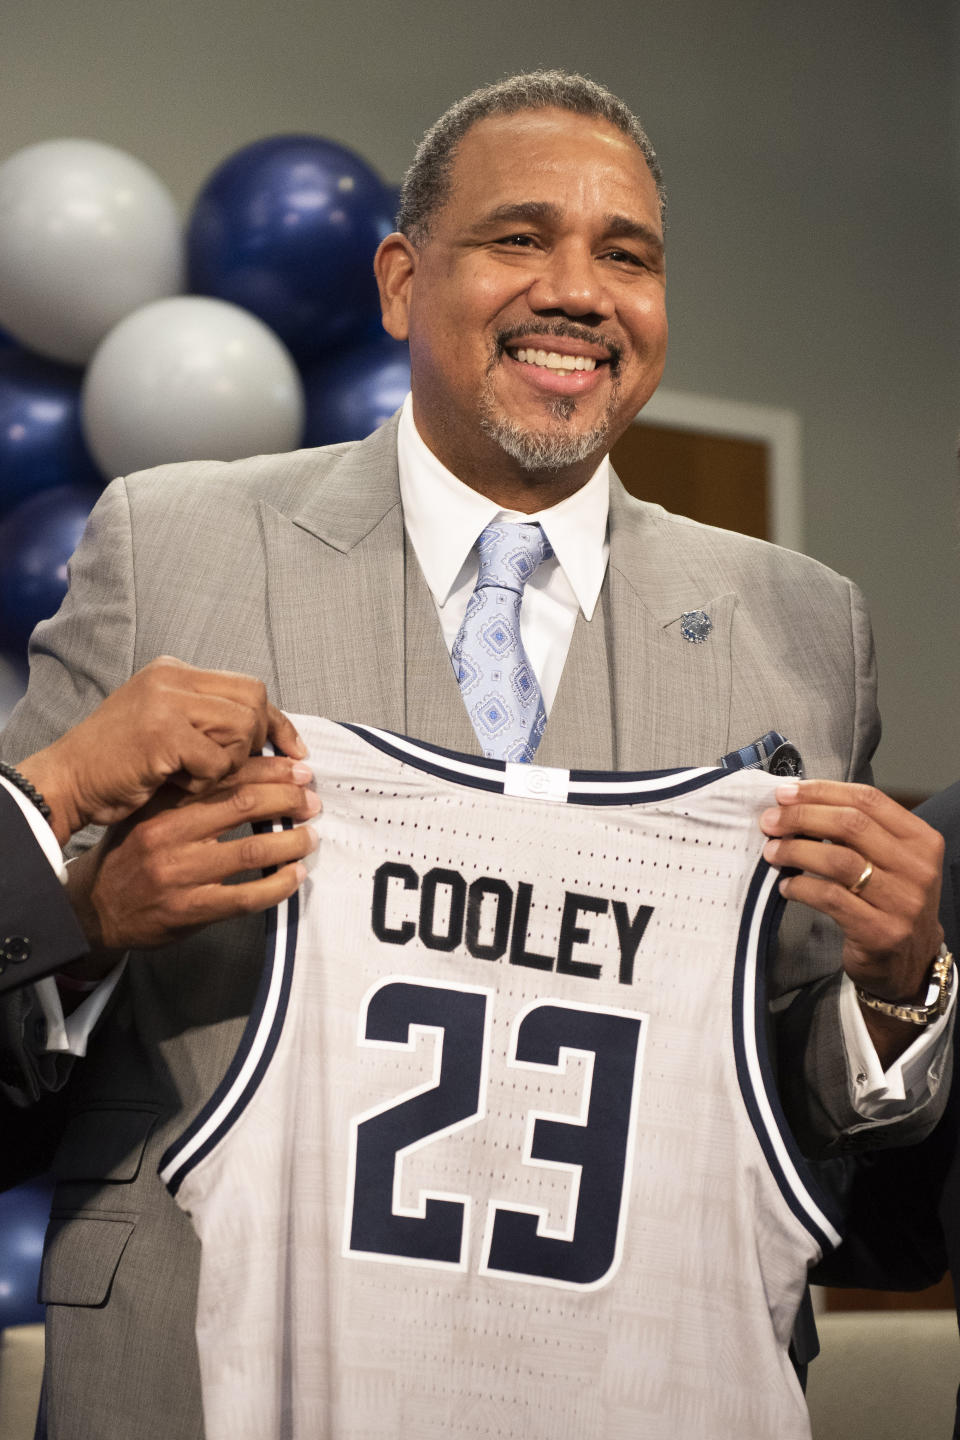 New Georgetown NCAA college basketball head coach Ed Cooley is presented with a jersey during an introductory press conference in Washington, Wednesday, March 22, 2023. (AP Photo/Cliff Owen)